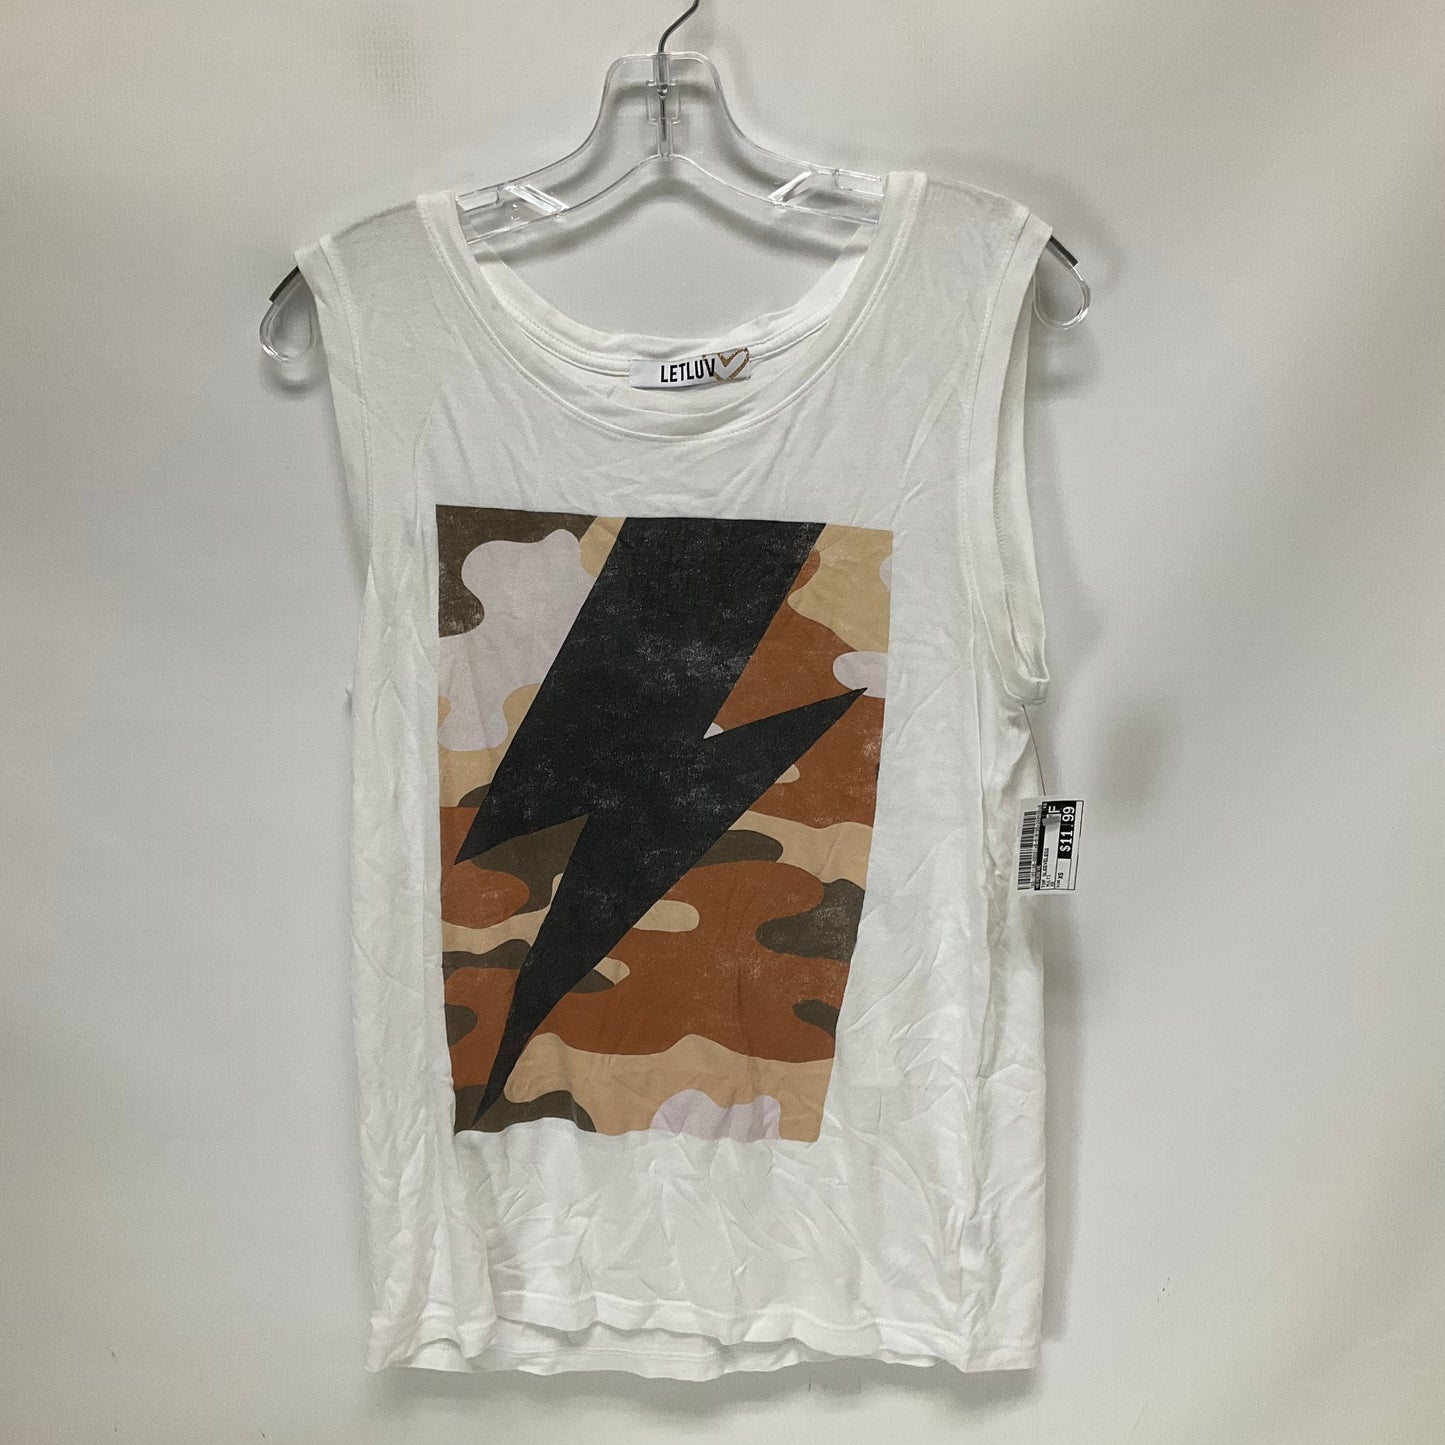 Multi-colored Top Sleeveless Evereve, Size Xs